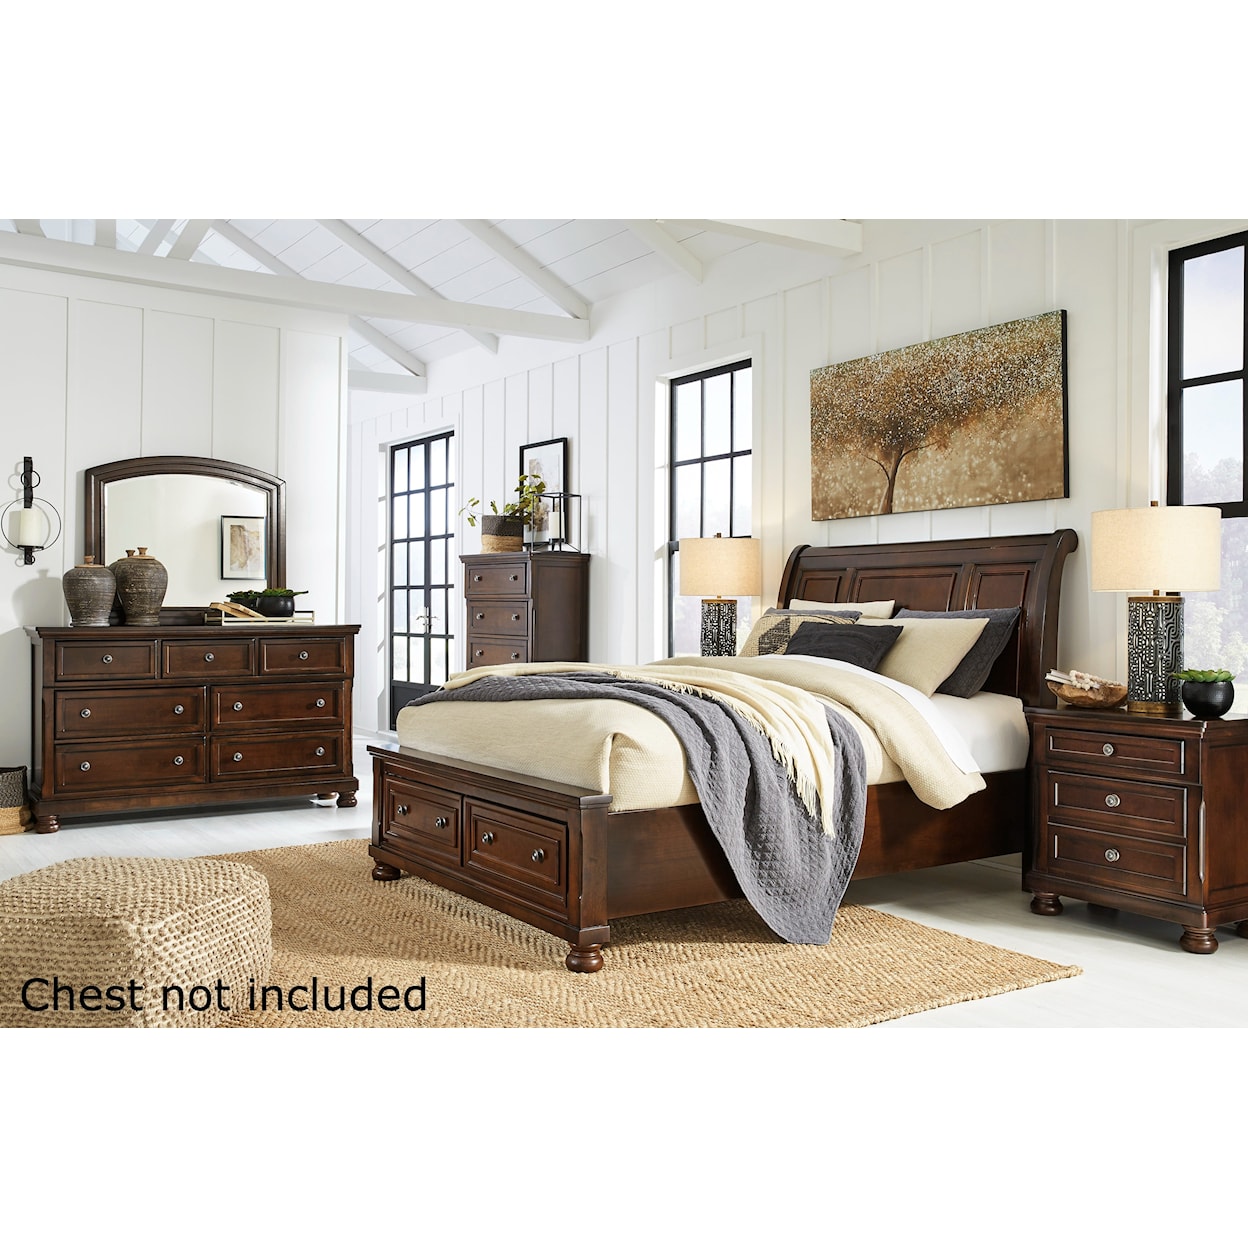 Signature Design by Ashley Furniture Porter Queen Bedroom Group